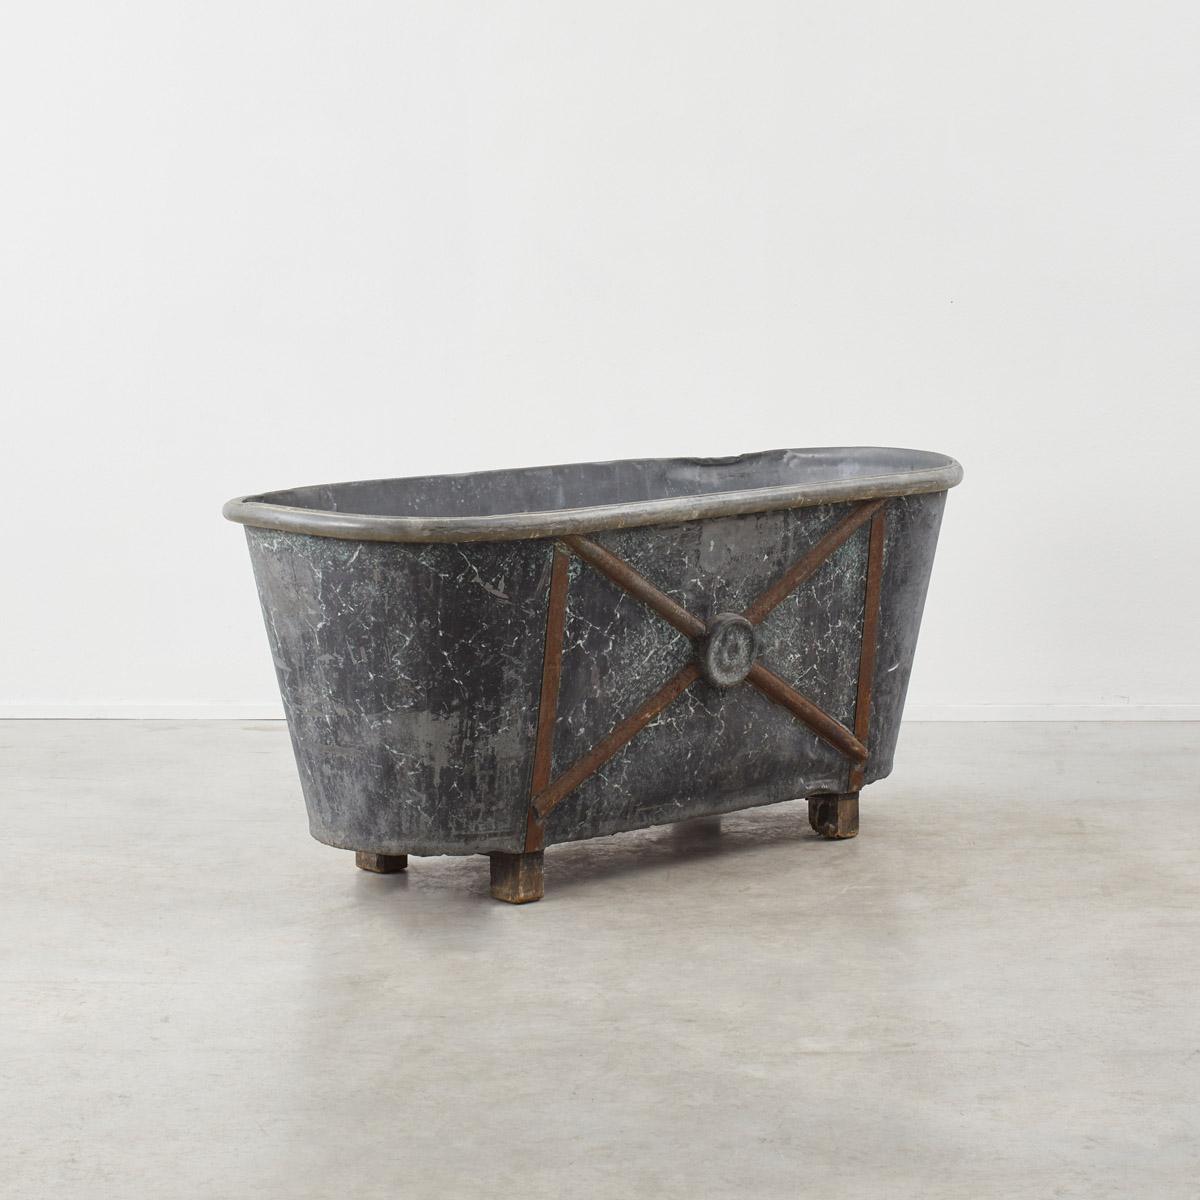 A rare 19th Century antique zinc double-ended roll-top bathtub by Chevalier Constructeur Paris, with decorative marbled exterior and striking cross motif. Military bathtubs like these were used by high-ranking officials on the battlefields during